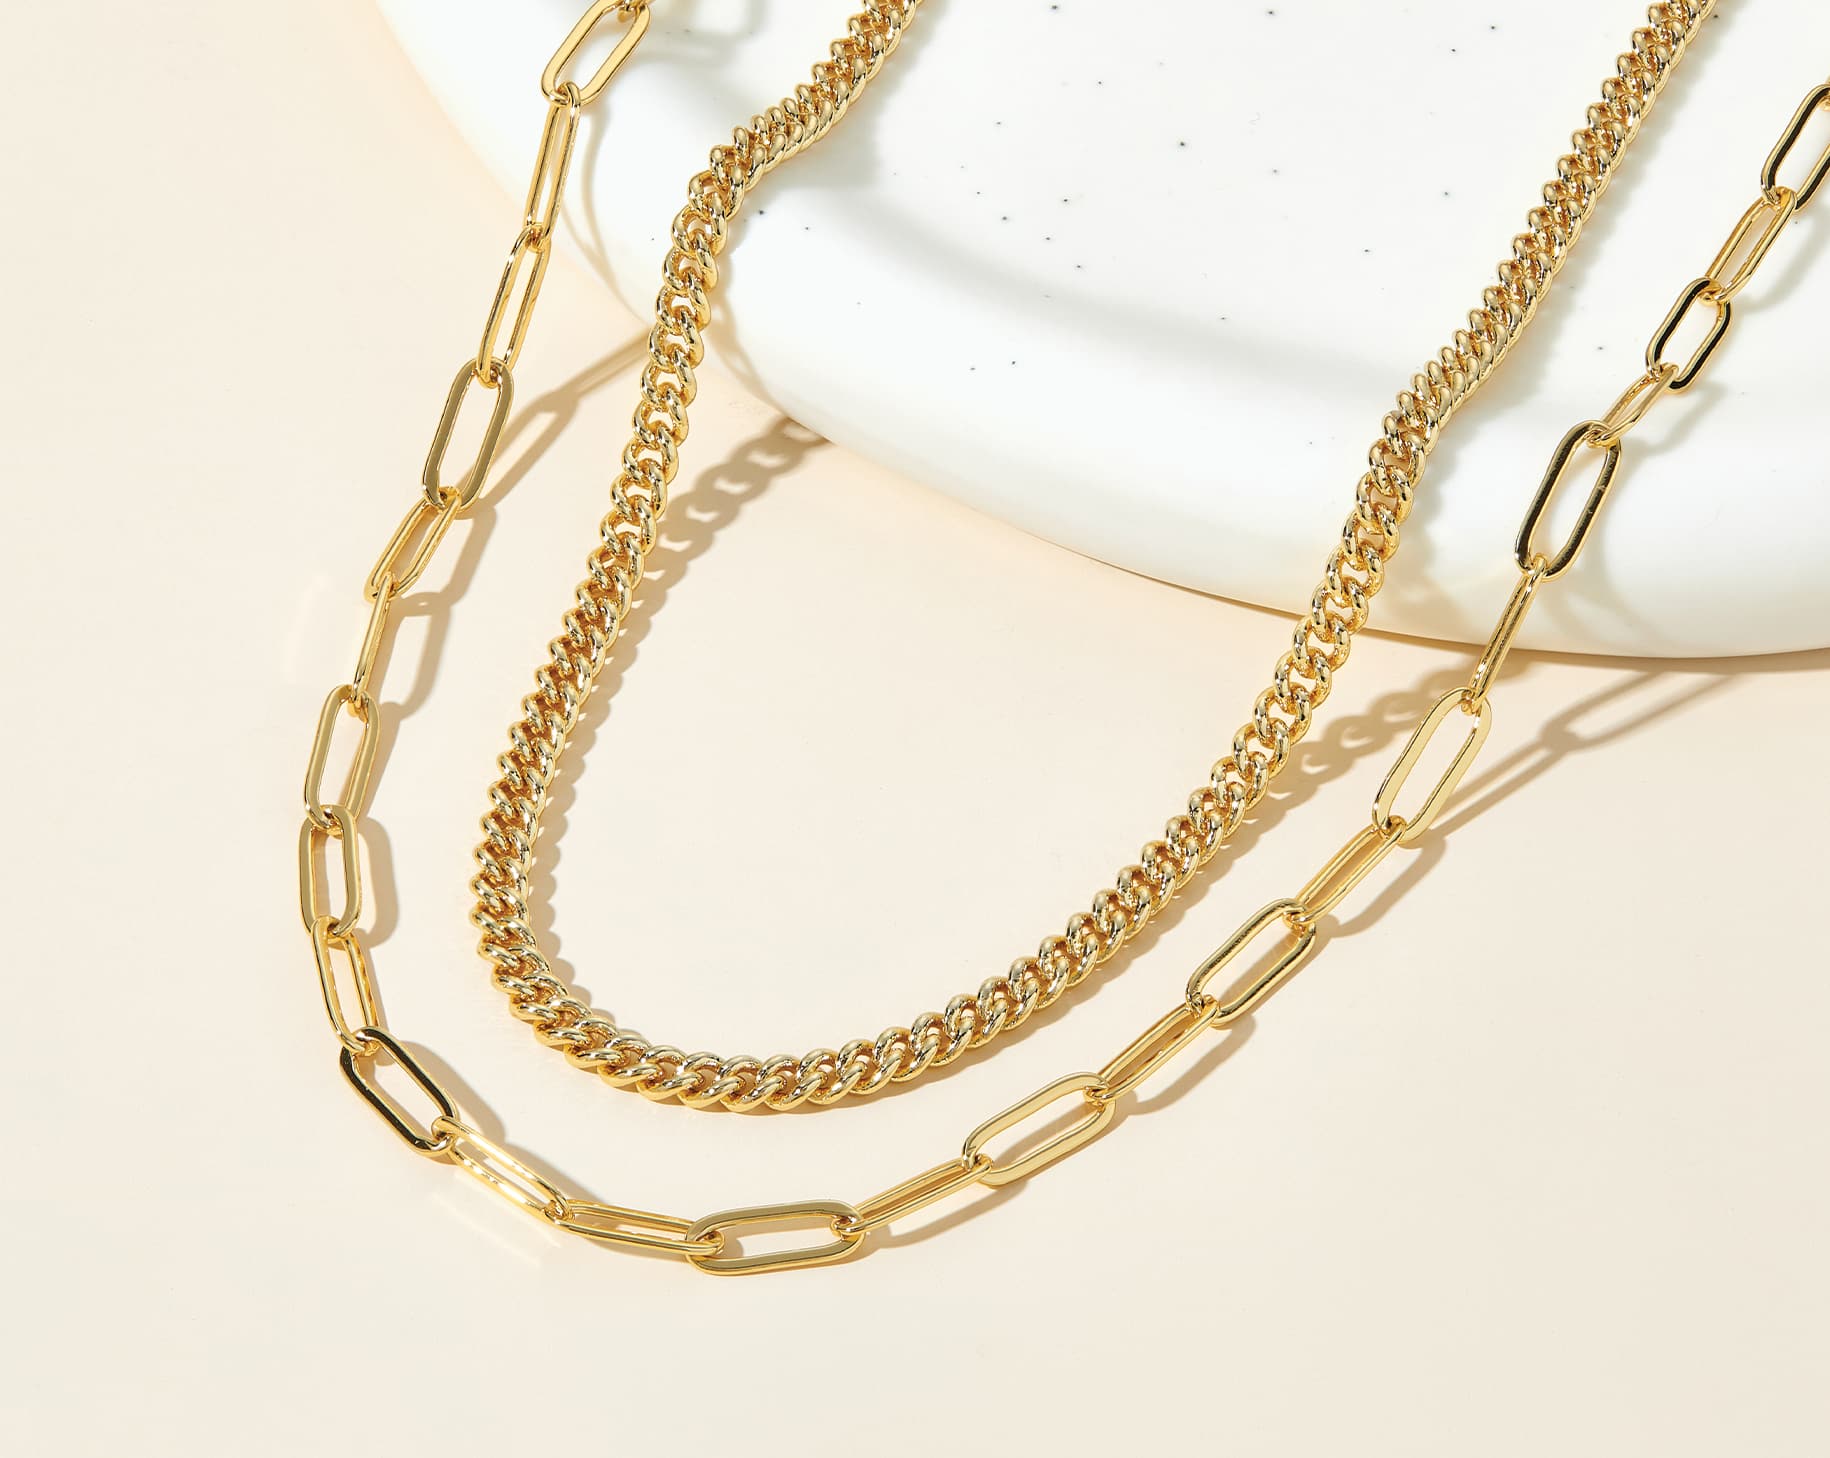 gold necklace stack on cream background